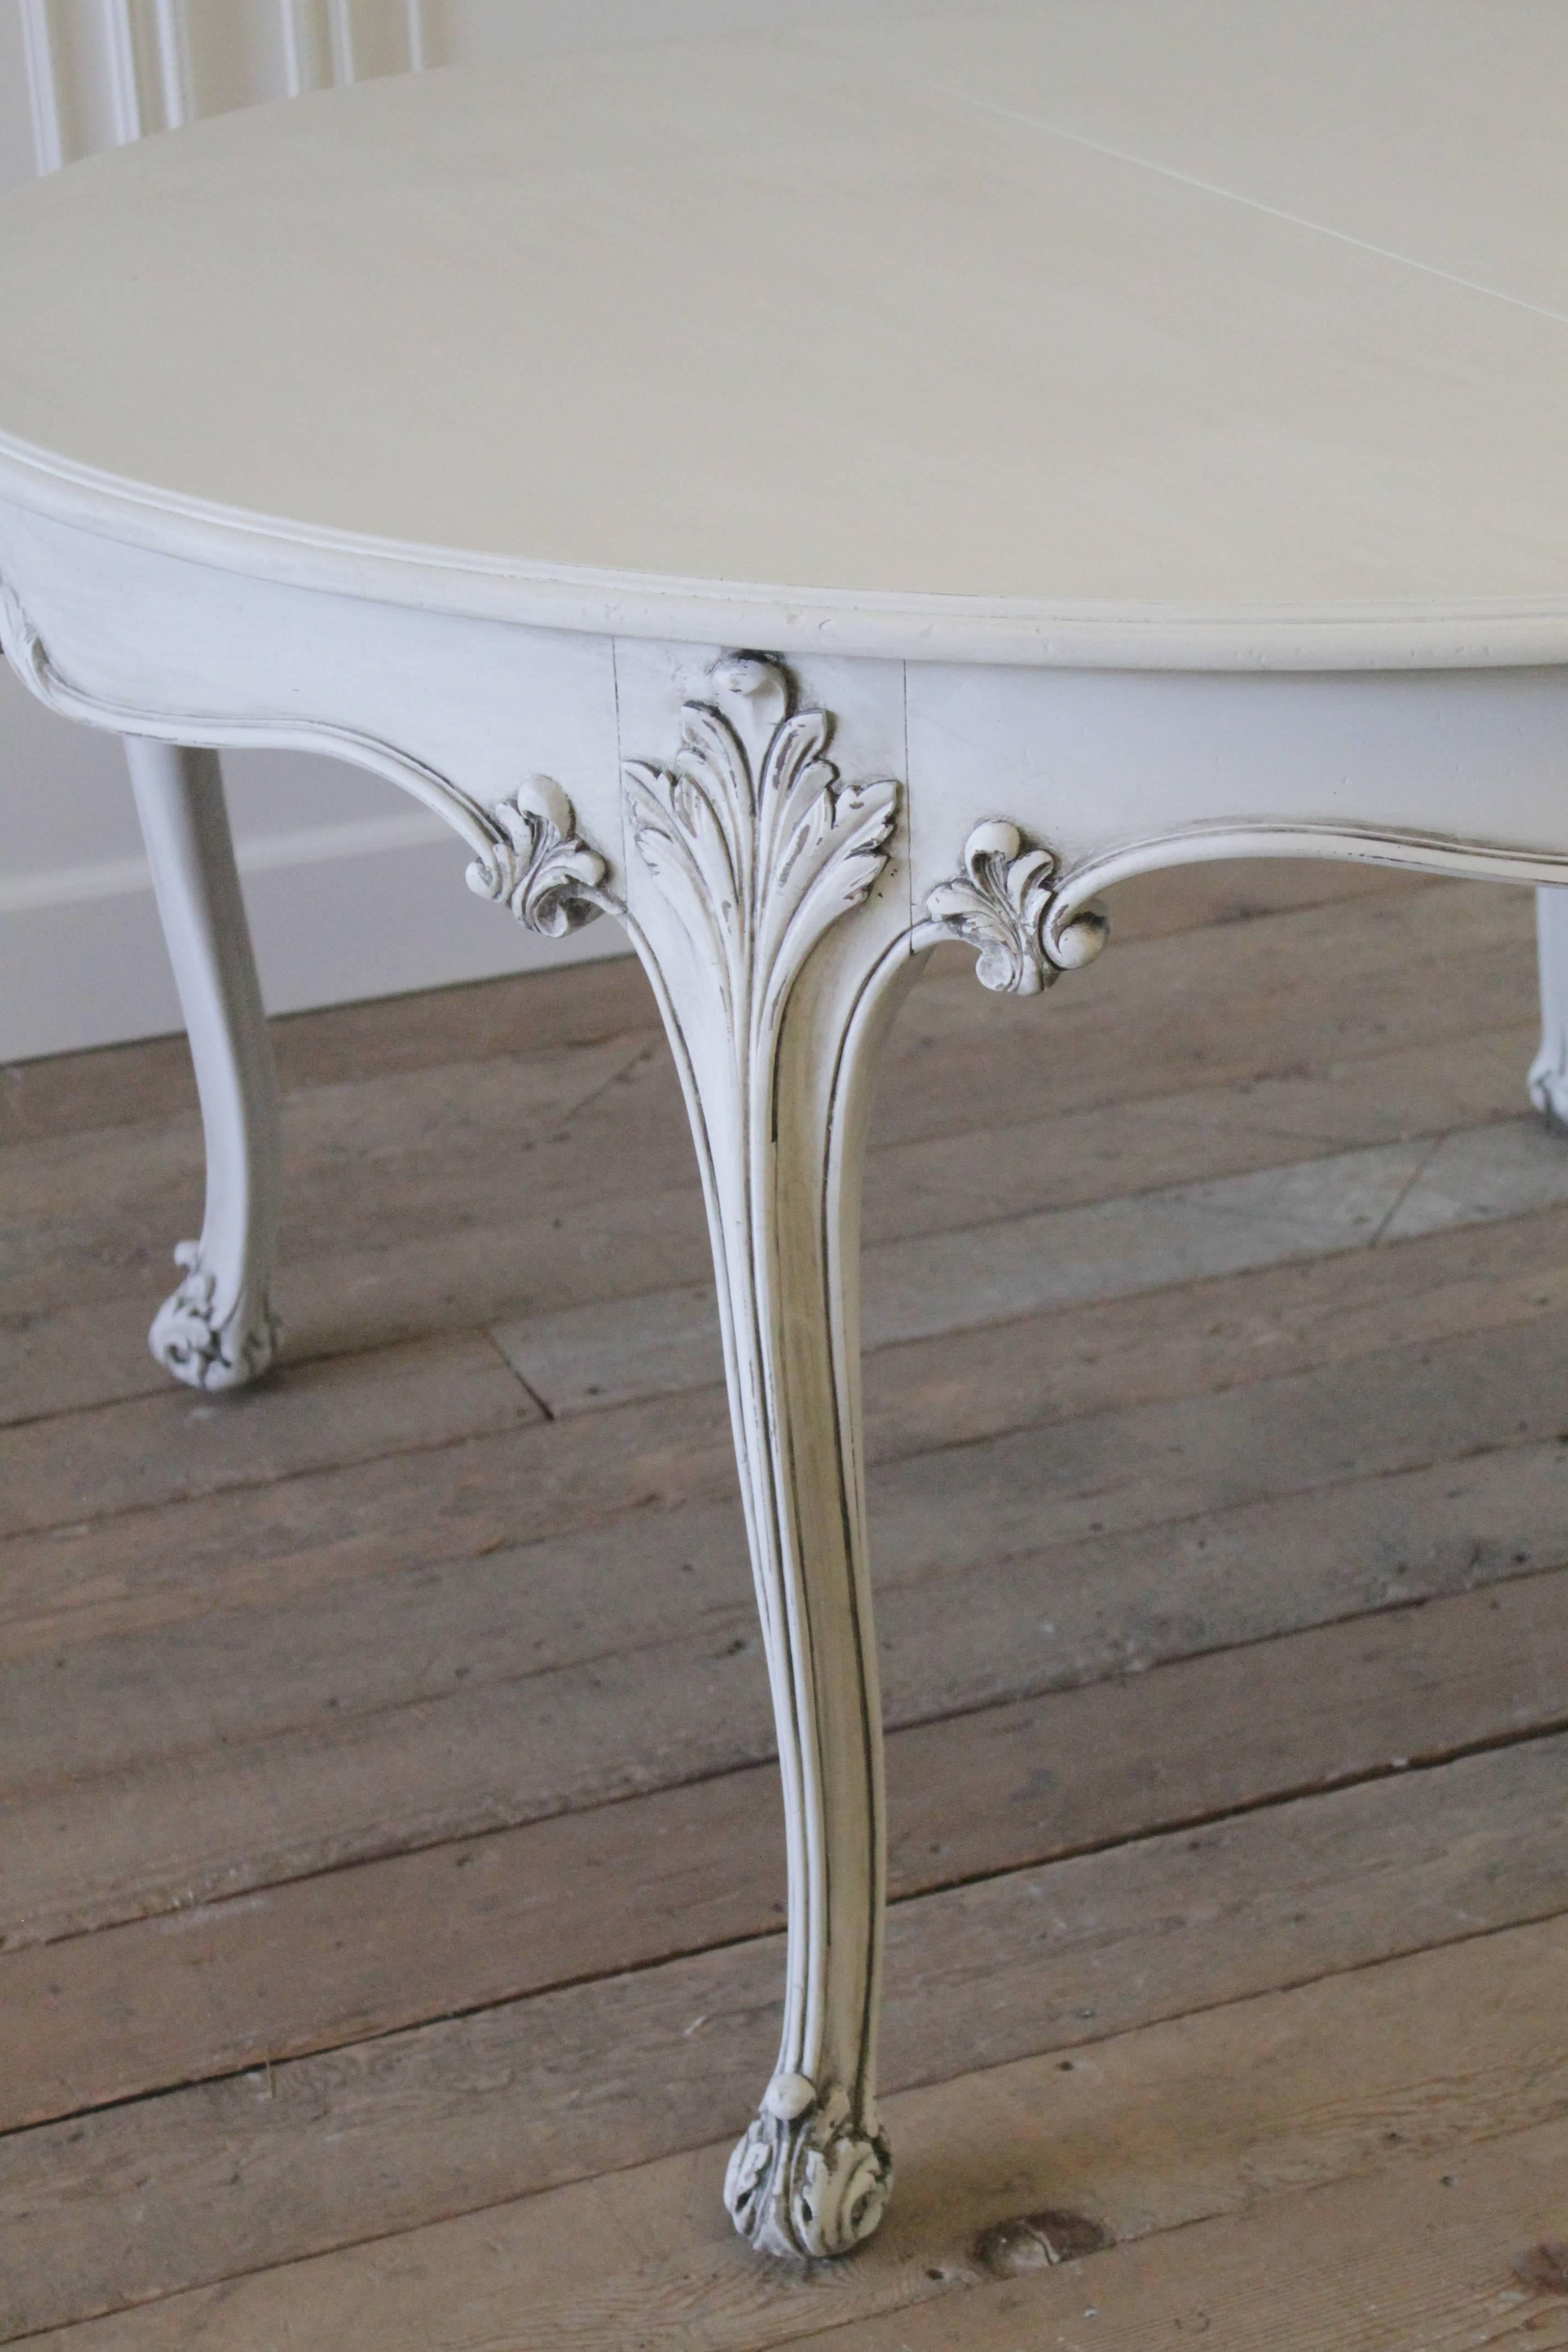 Beautiful round carved walnut dining table has two extension leaves. Painted in our oyster white with subtle distressing and an antique glaze finish.
I love the pretty carved cabriole style legs, with acanthus covered feet, and carved cartouche and